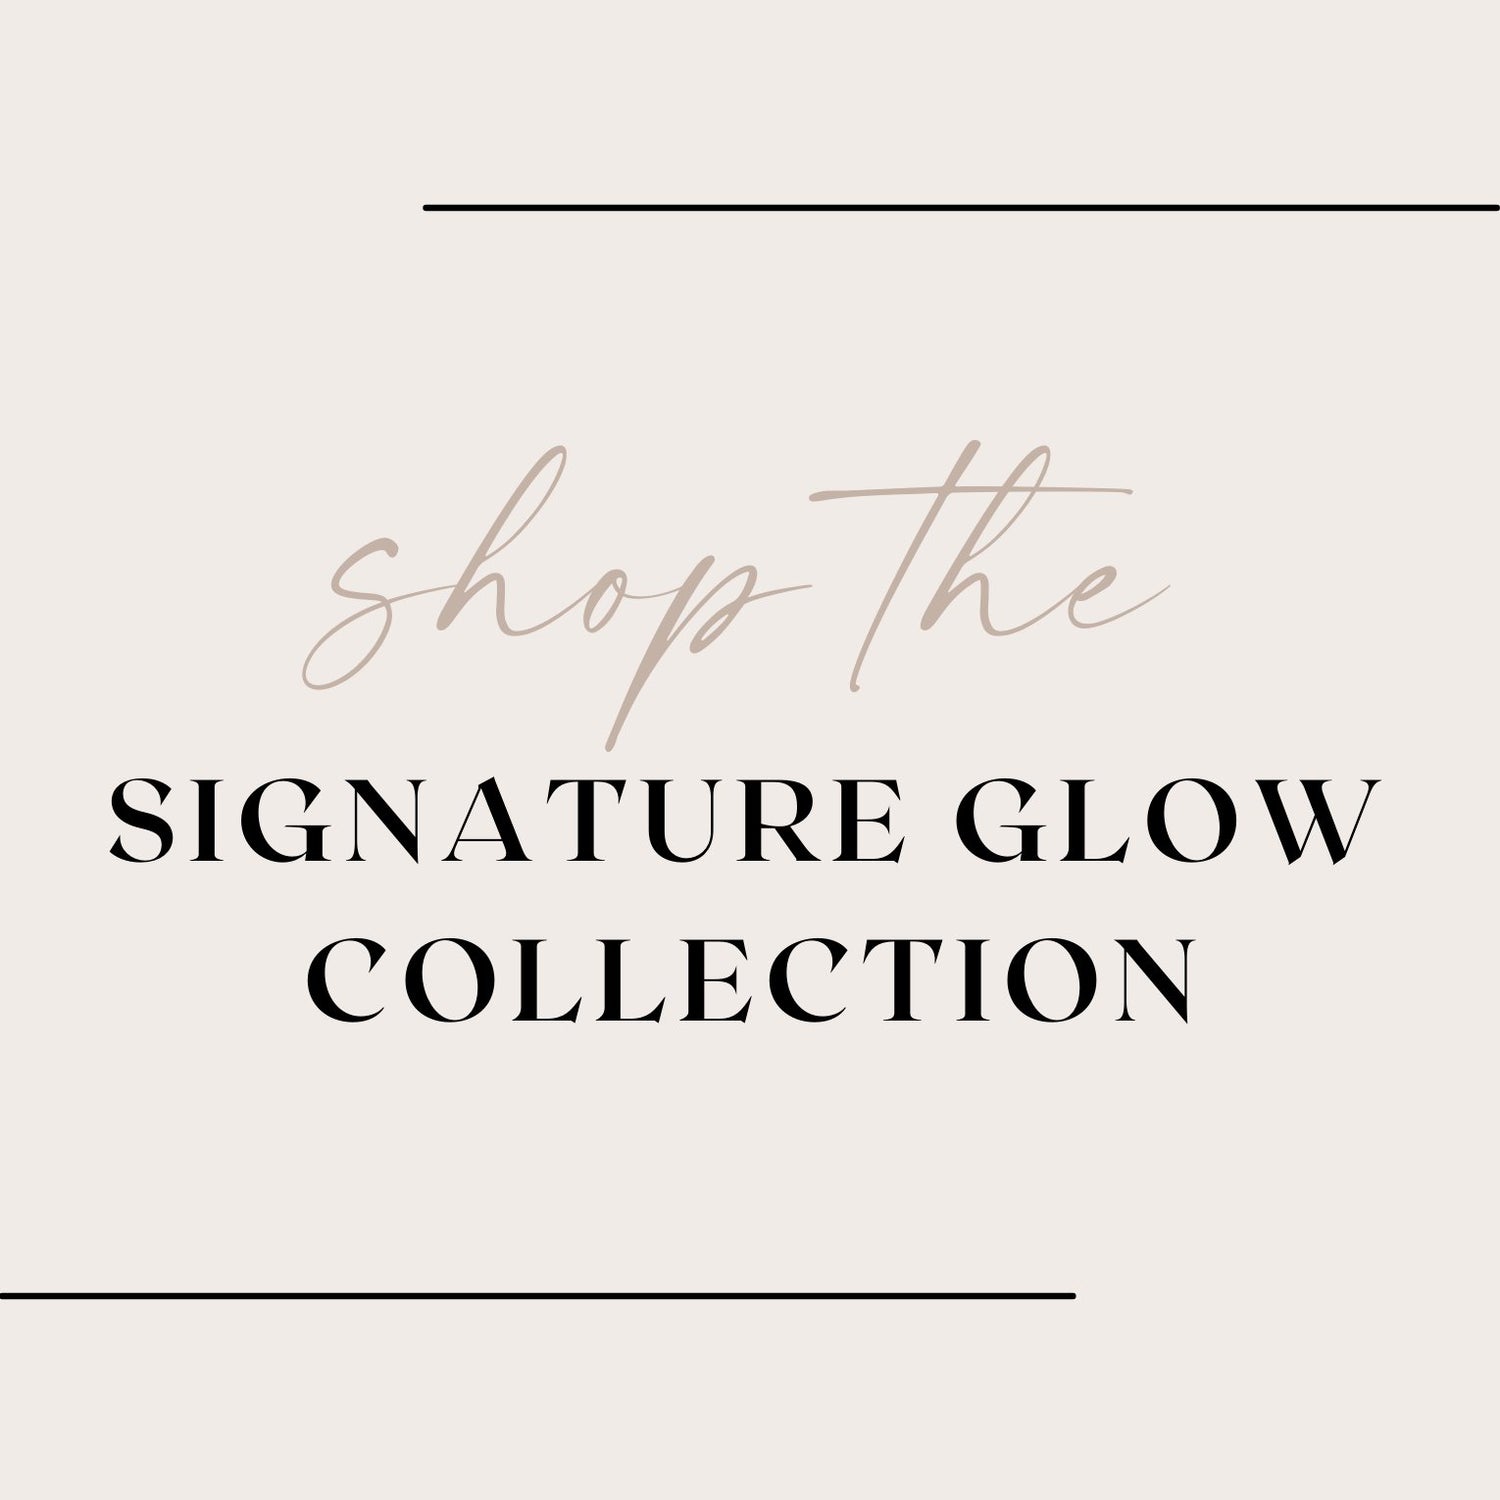 Signature Glow Collection